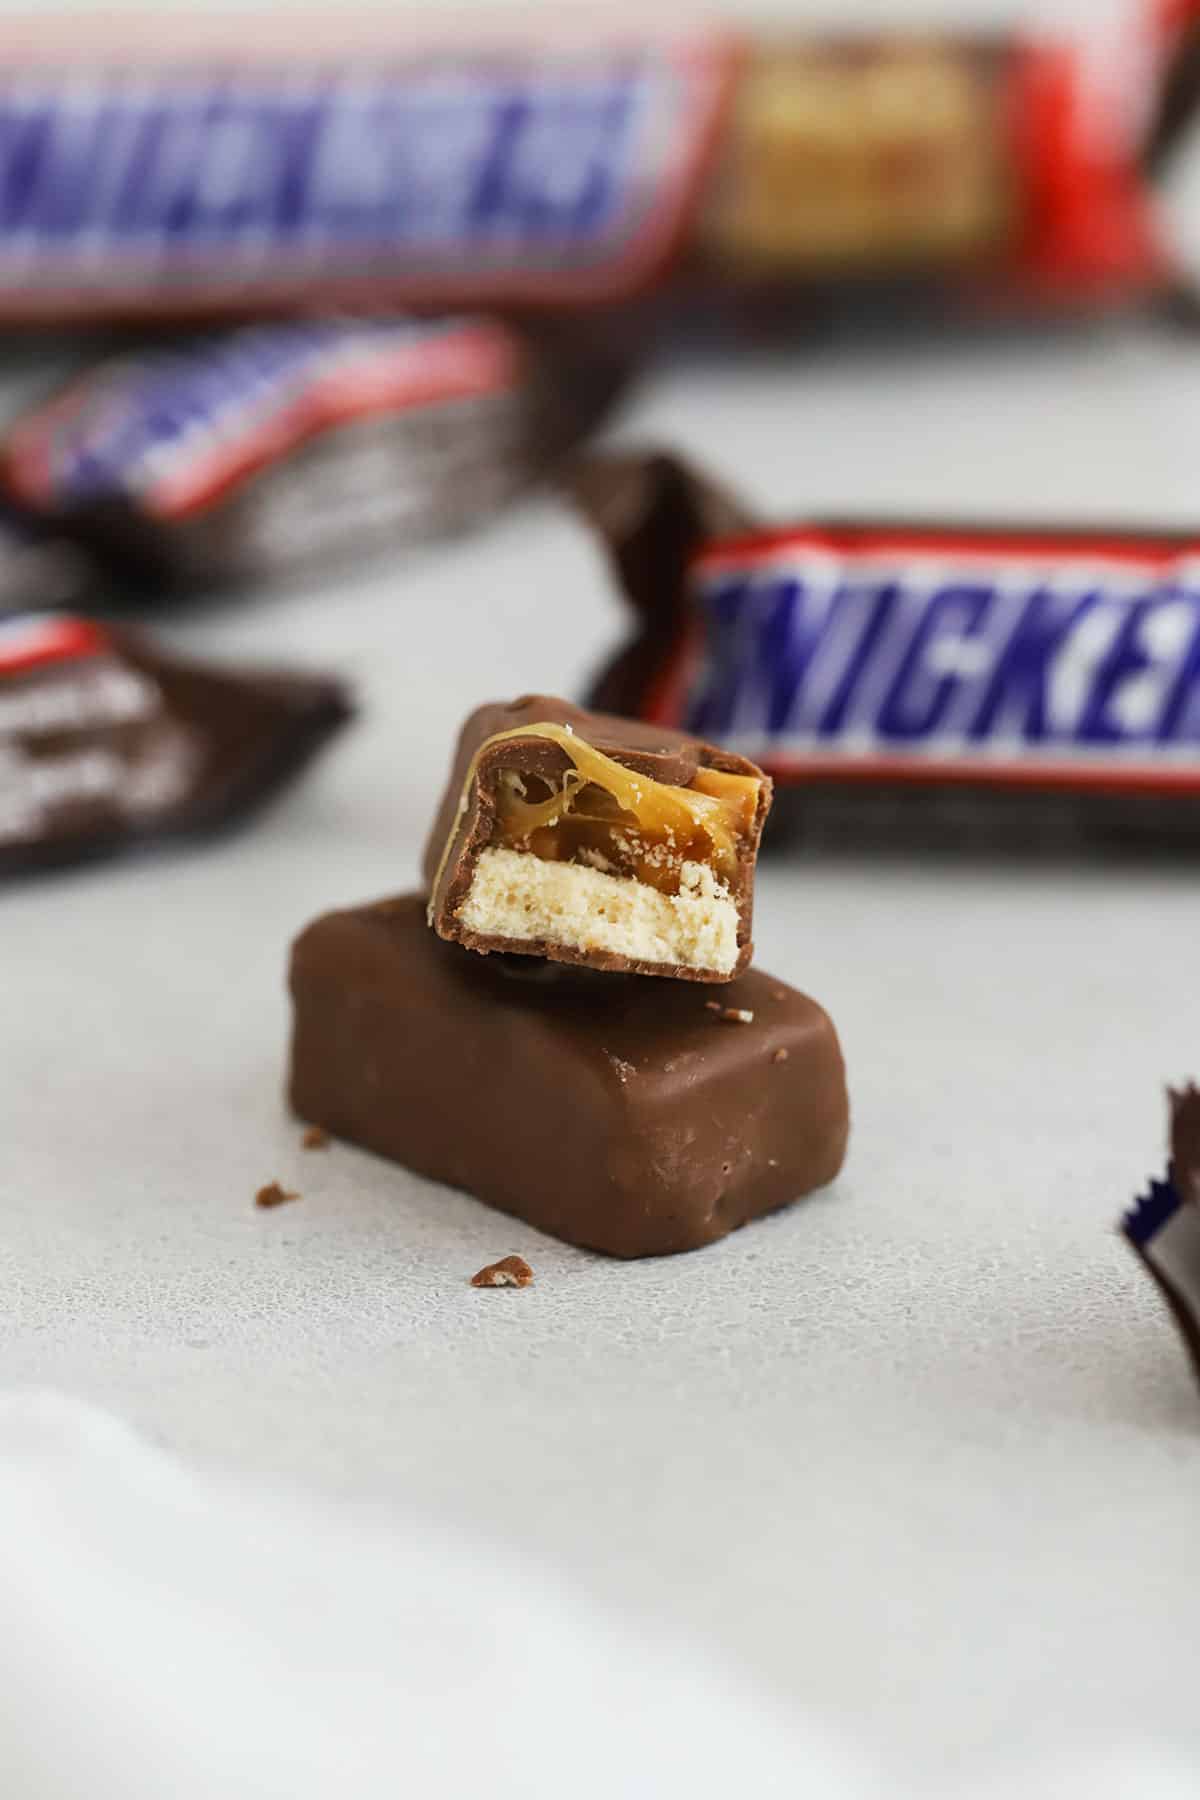 Snickers cut in half and stacked